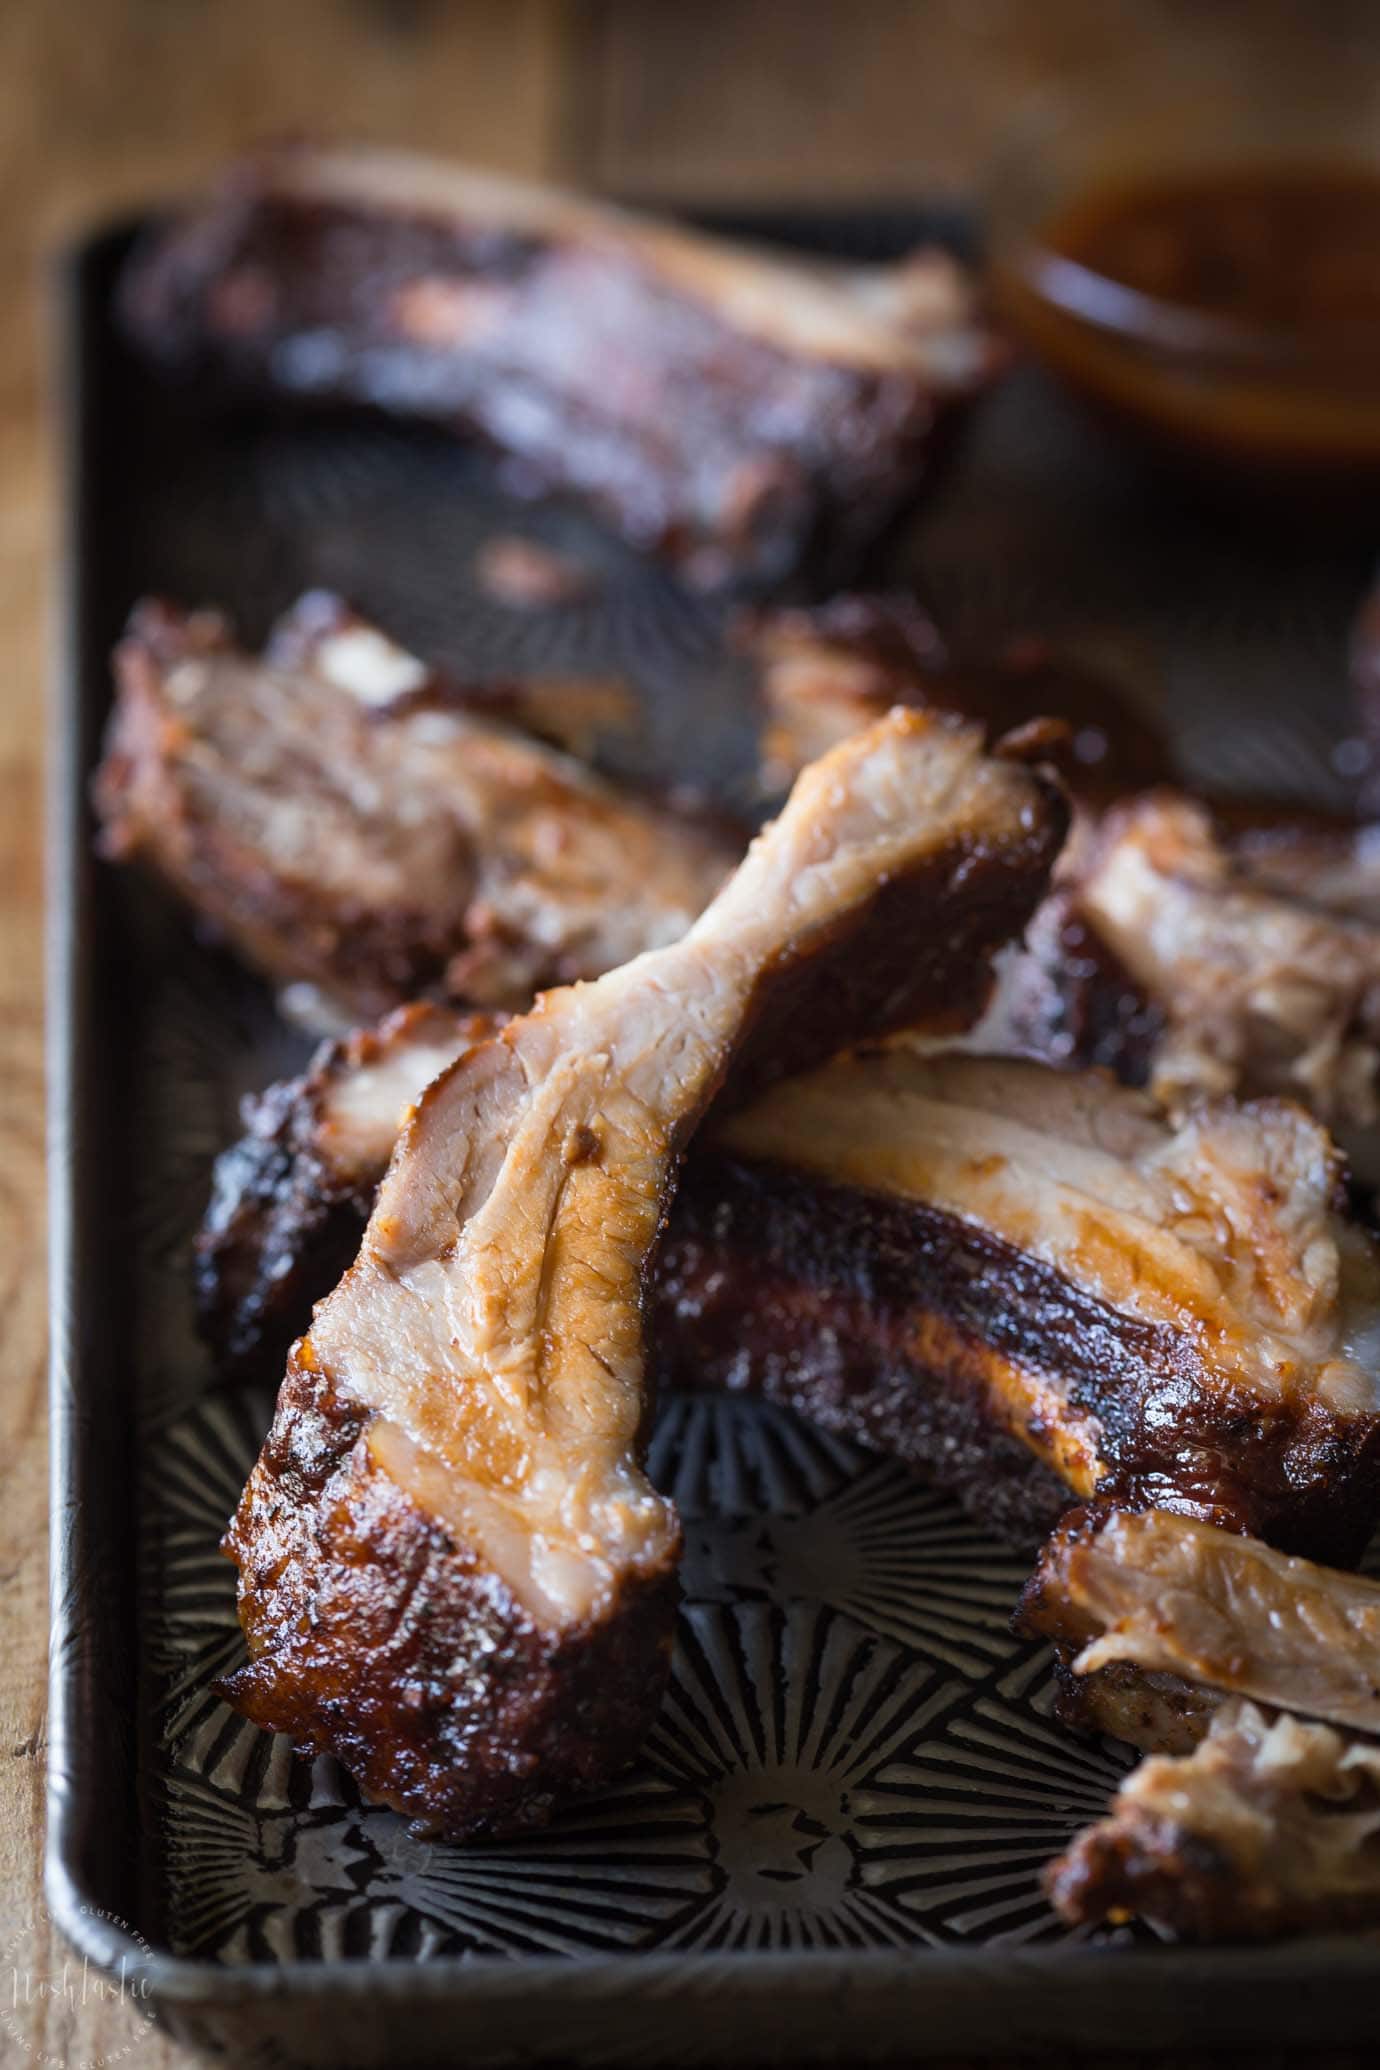 Slow Cooker Baby Back Ribs that are fall off the bone tender, delicious with a Memphis style rub and easy homemade BBQ sticky sauce! gluten free too